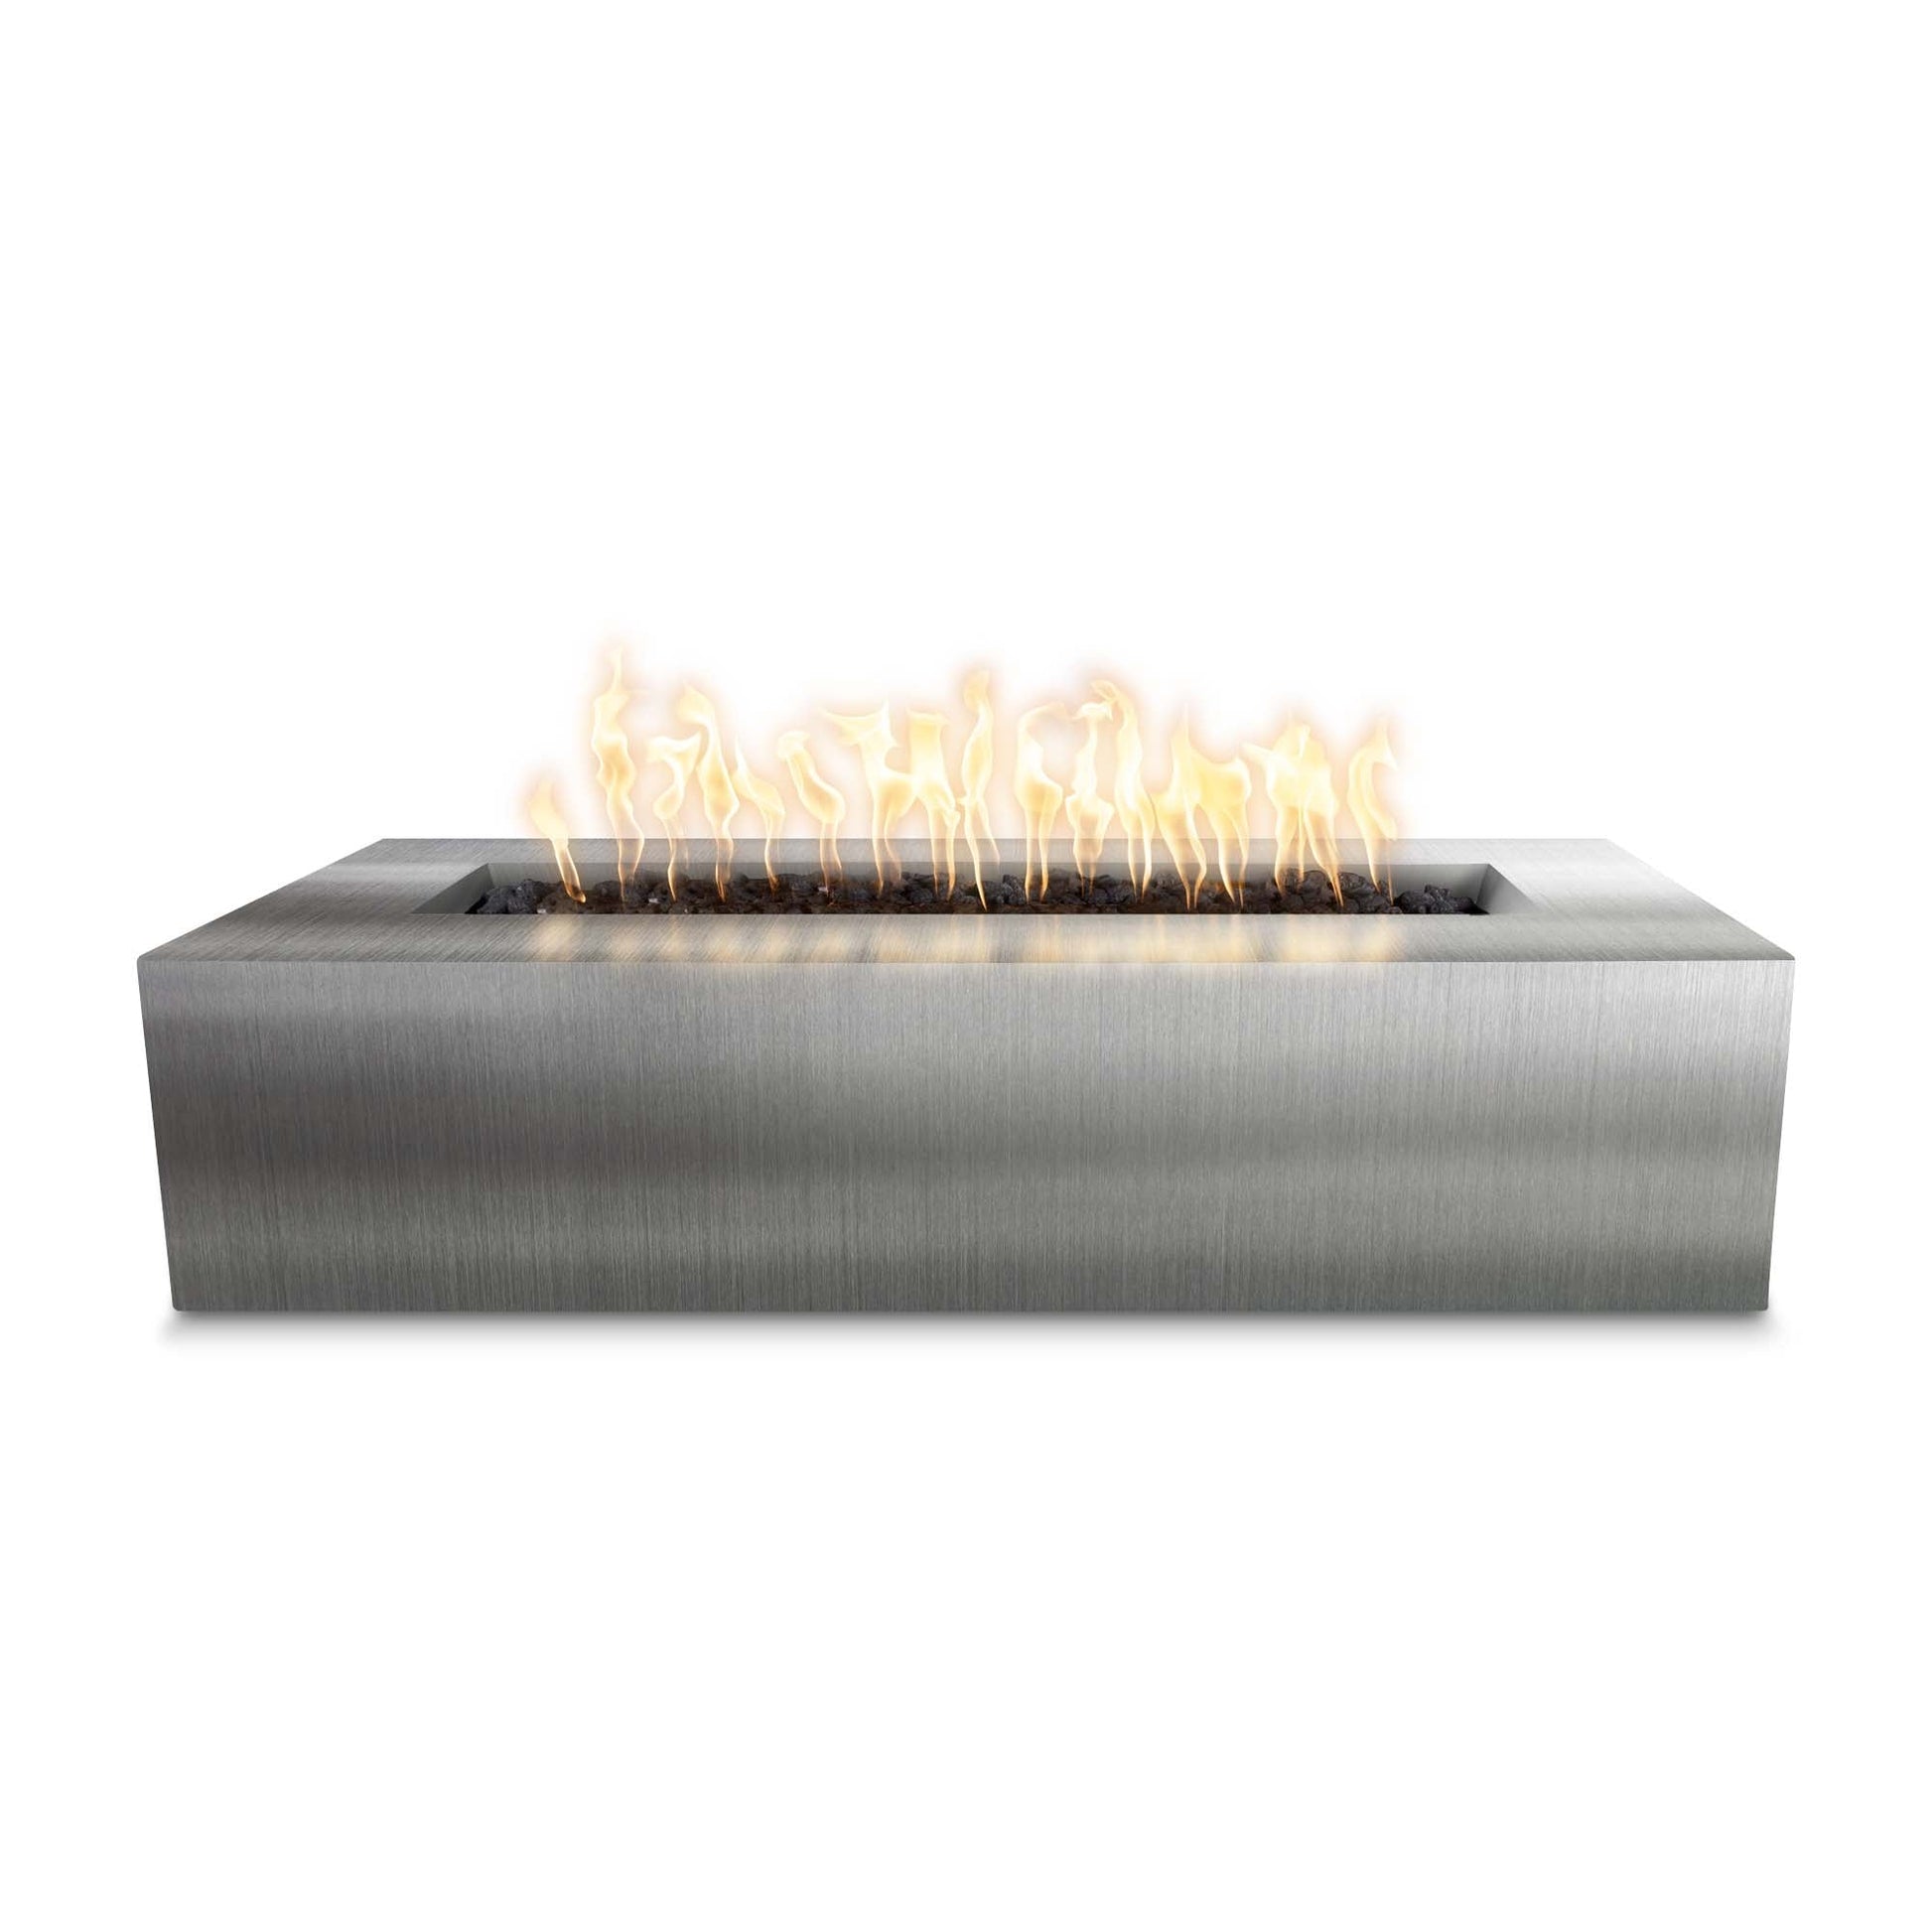 The Outdoor Plus Rectangular Regal 60" Stainless Steel Natural Gas Fire Pit with Match Lit with Flame Sense Ignition